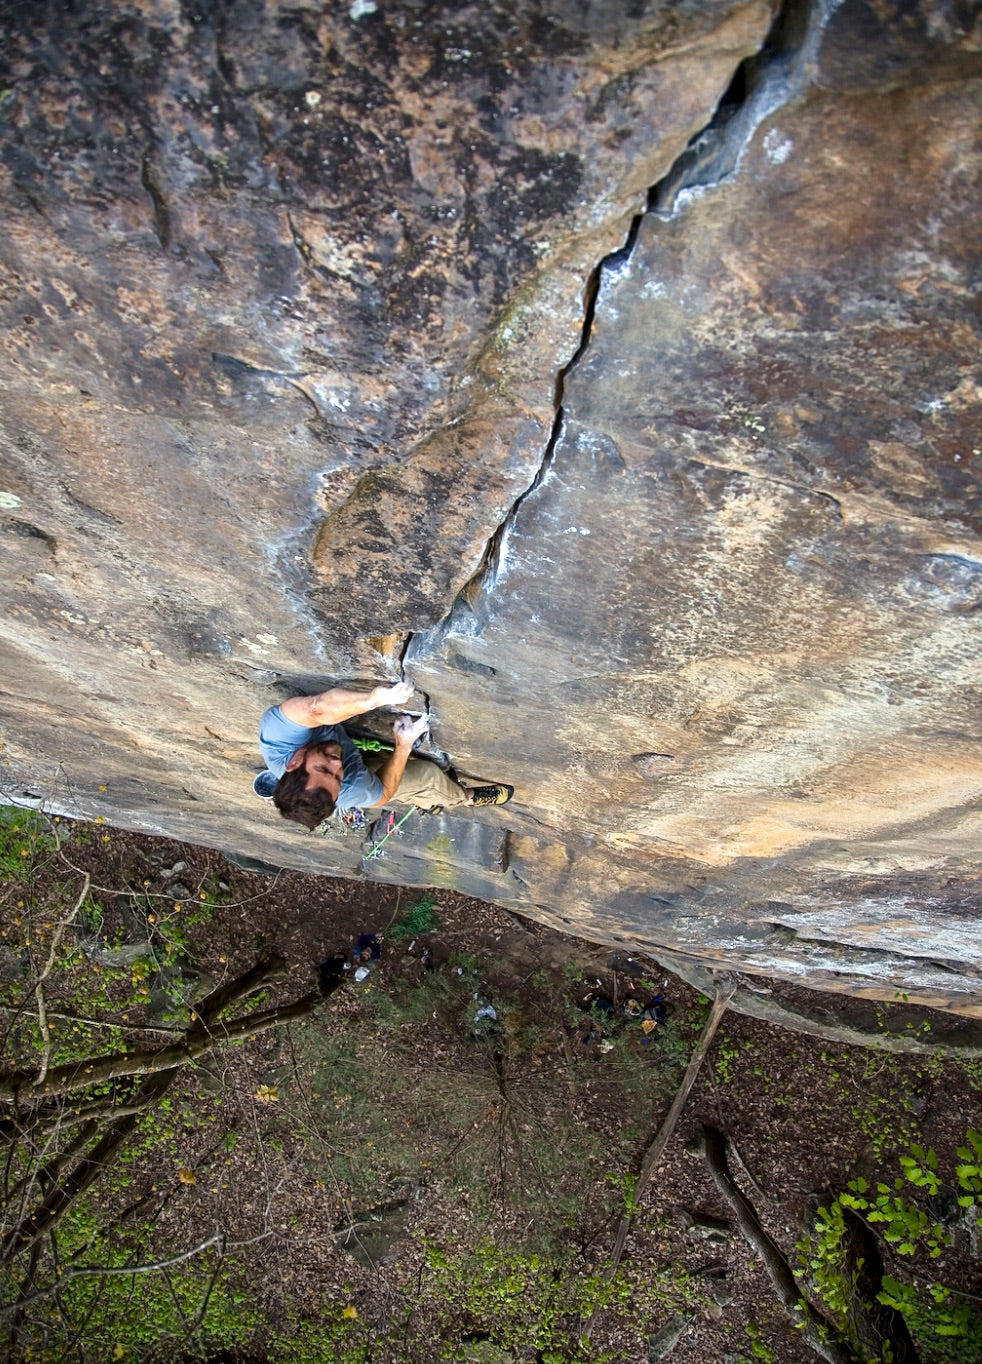 SNUT: A Snapshot of the New River Gorge’s Best, Least-Known Crag